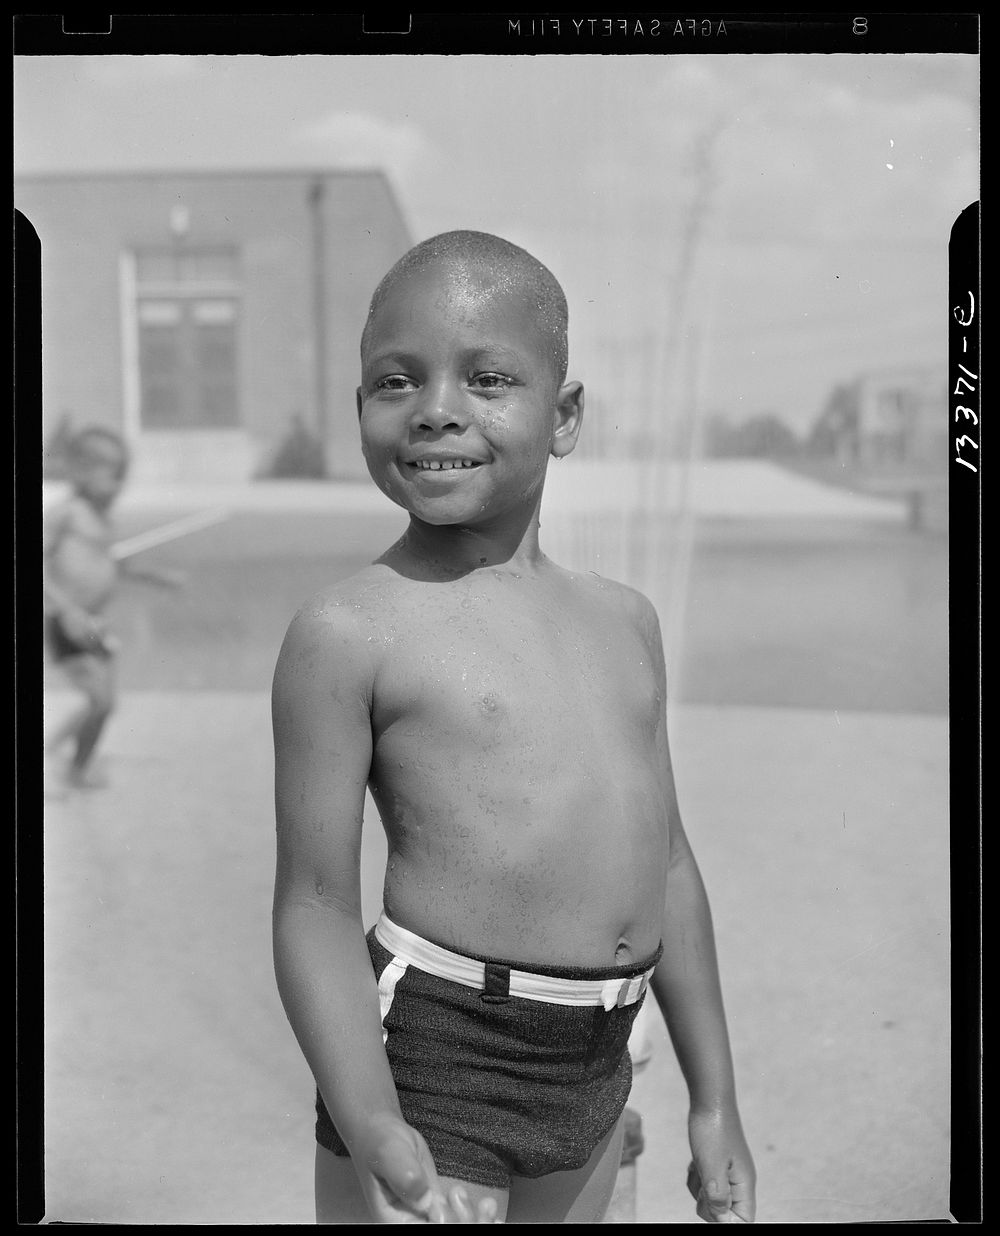 Anacostia, D.C. Frederick Douglass housing project. Cooling off under the community sprayer. Sourced from the Library of…